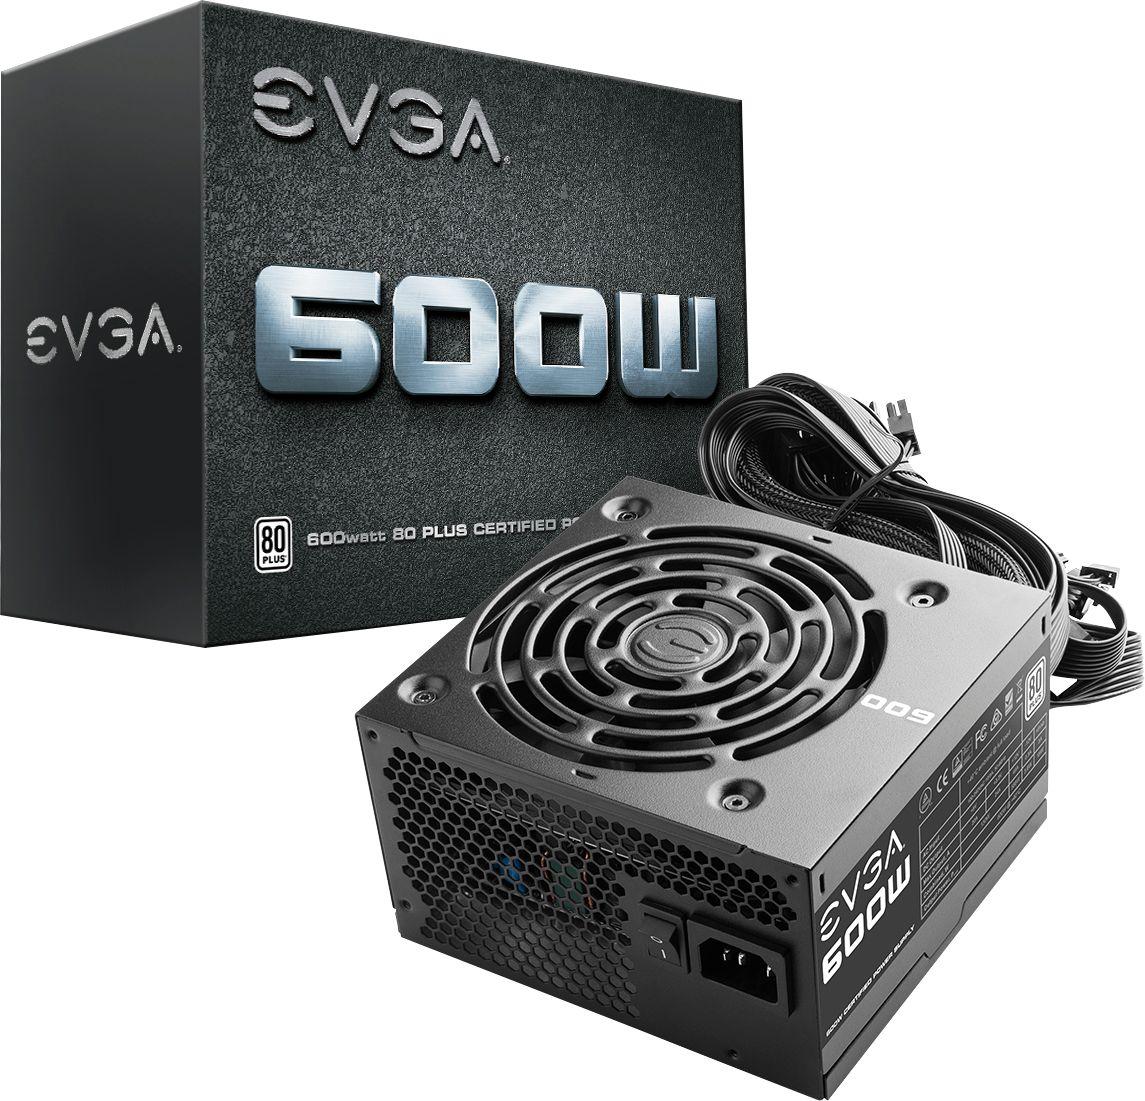 EVGA 600W 80+ Certified ATX Power Supply for $34.99